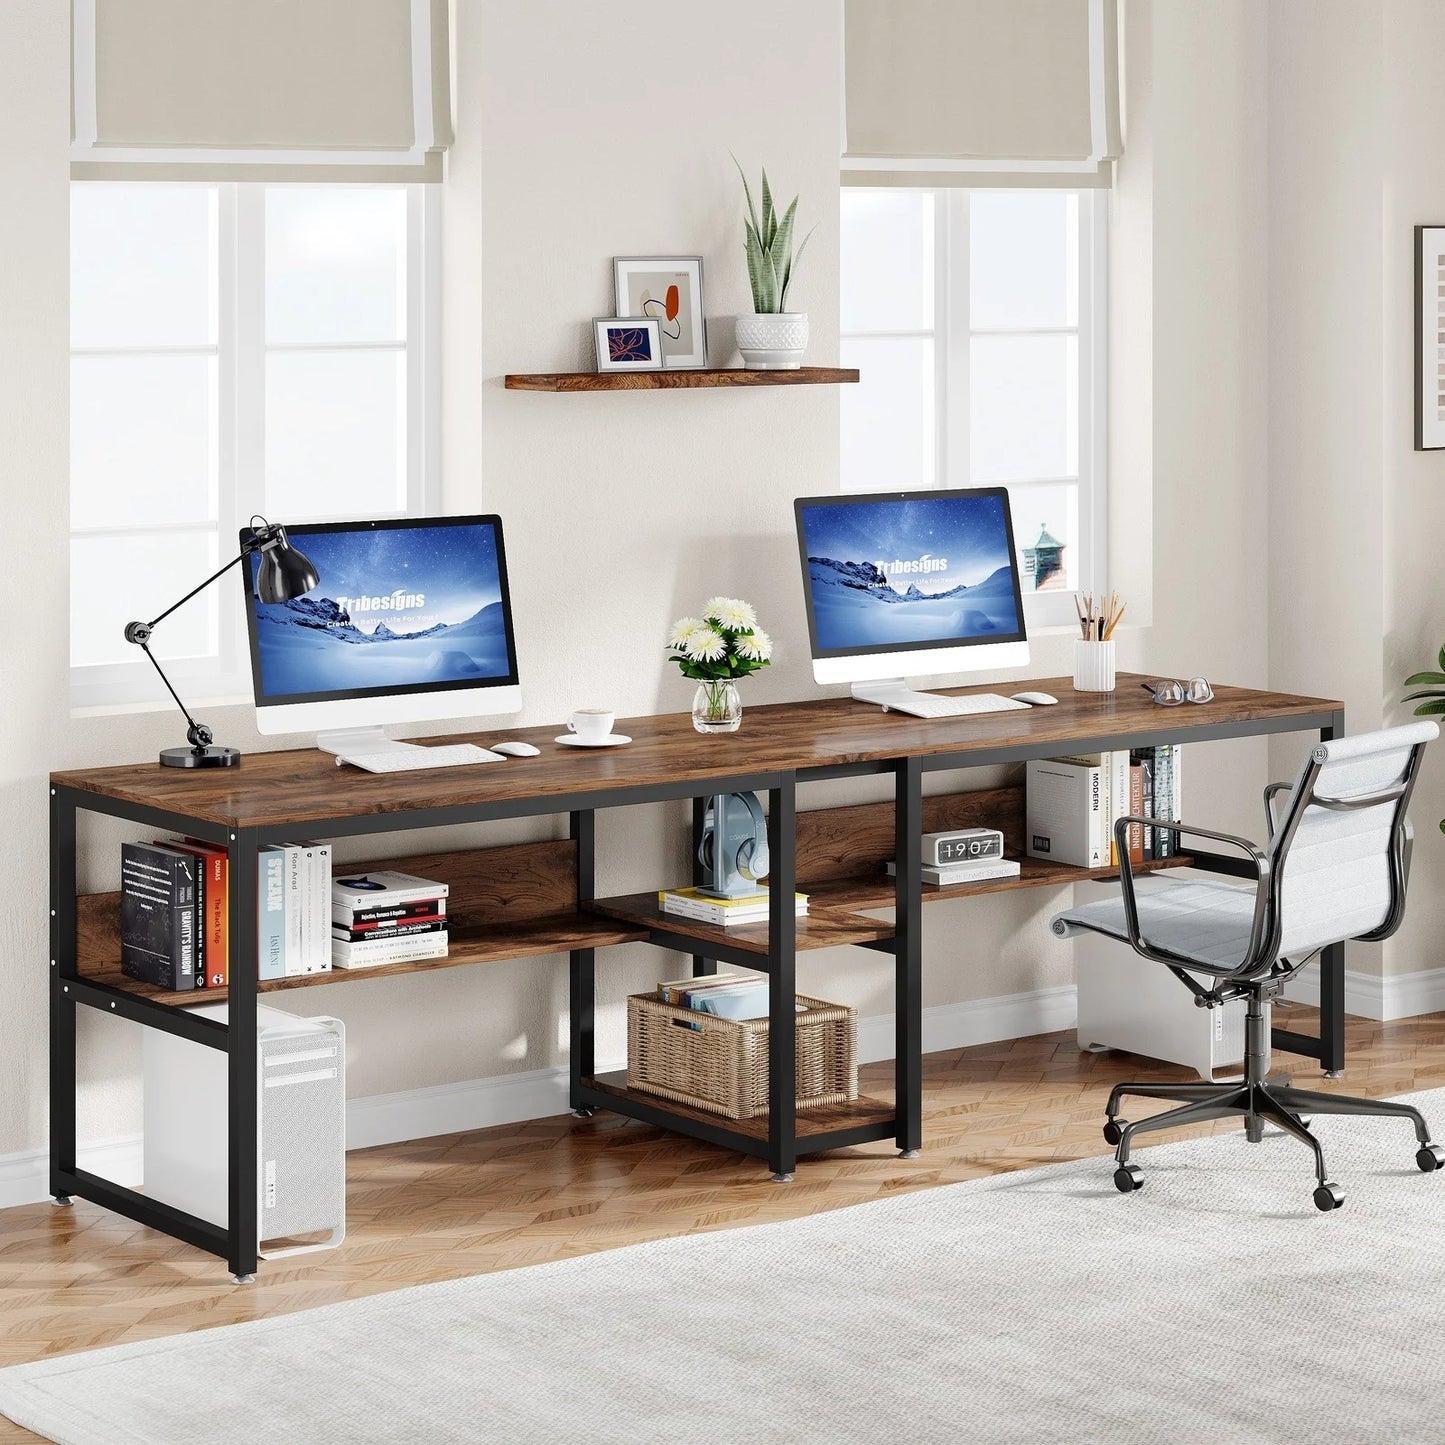 Tribesigns Two Person Desk, 78.7 Computer Double Desk with Bookshelf